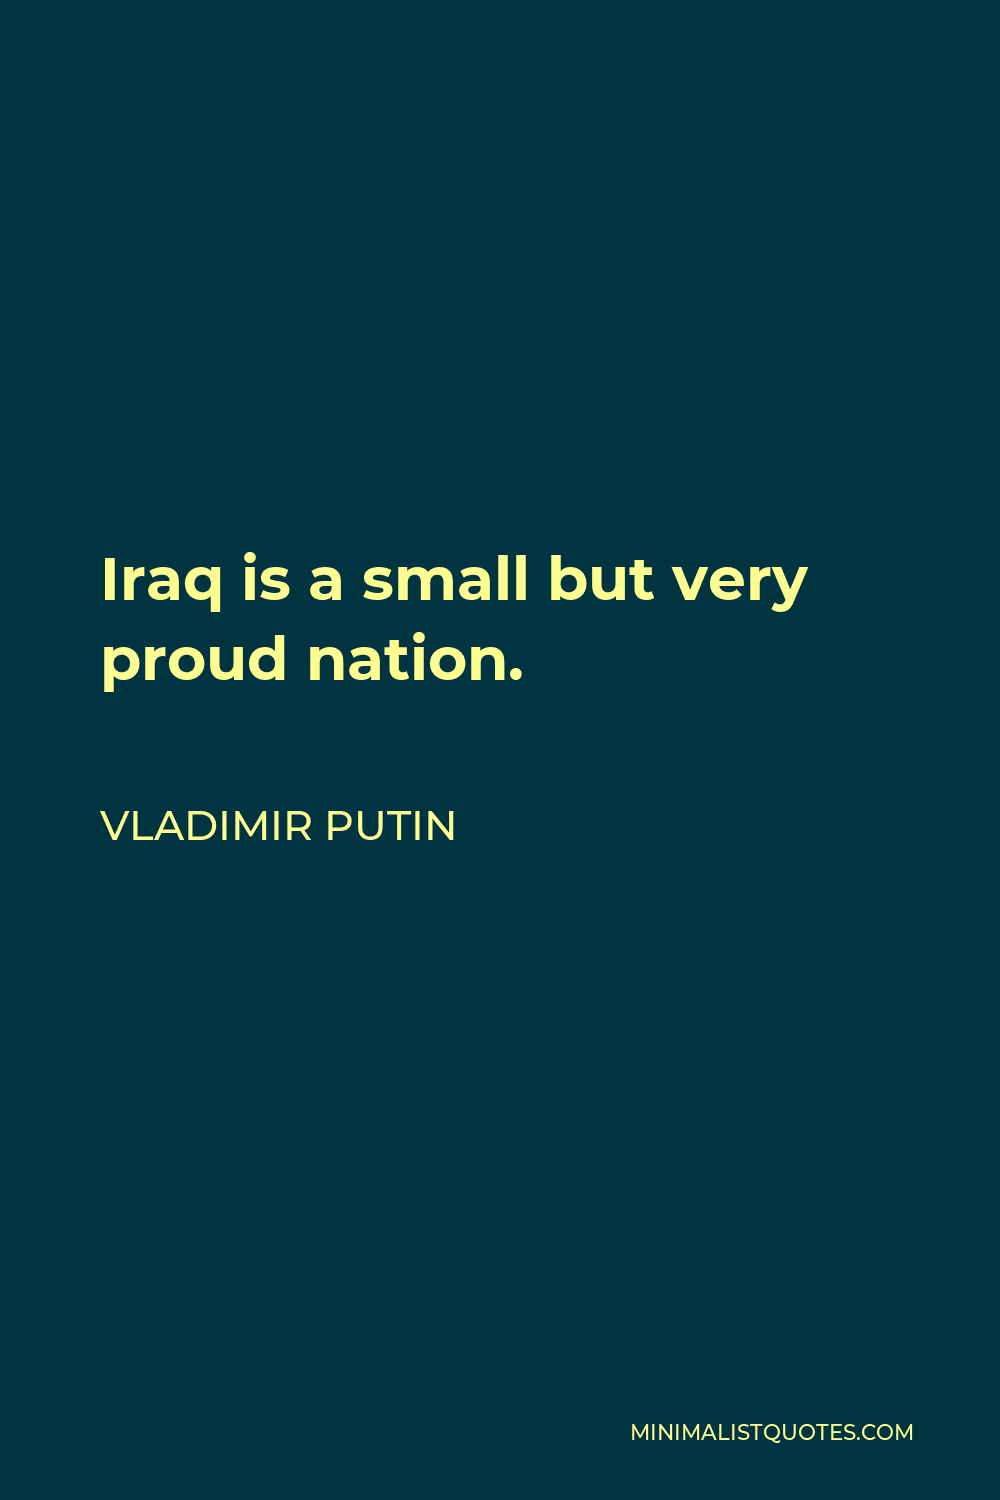 Vladimir Putin Quote - Iraq is a small but very proud nation.